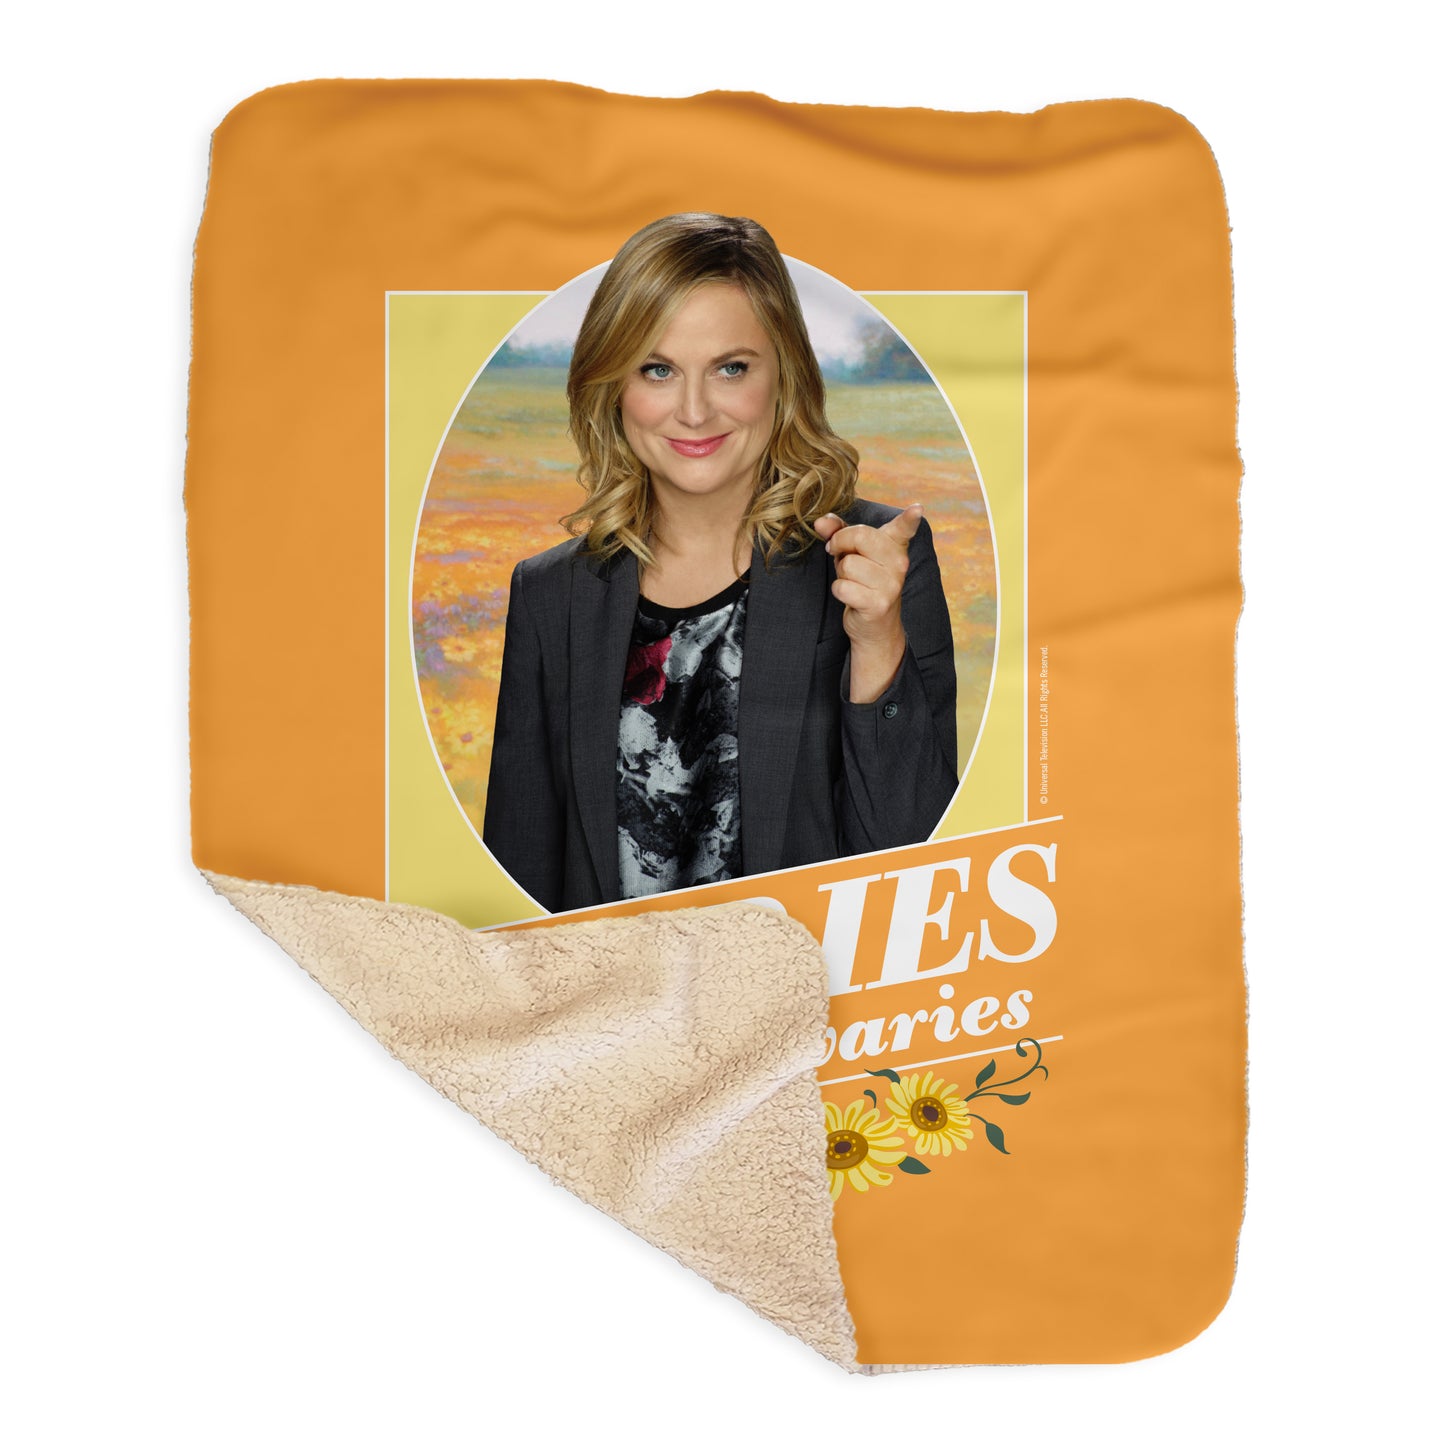 Parks and Recreation Ovaries Before Brovaries Sherpa Blanket